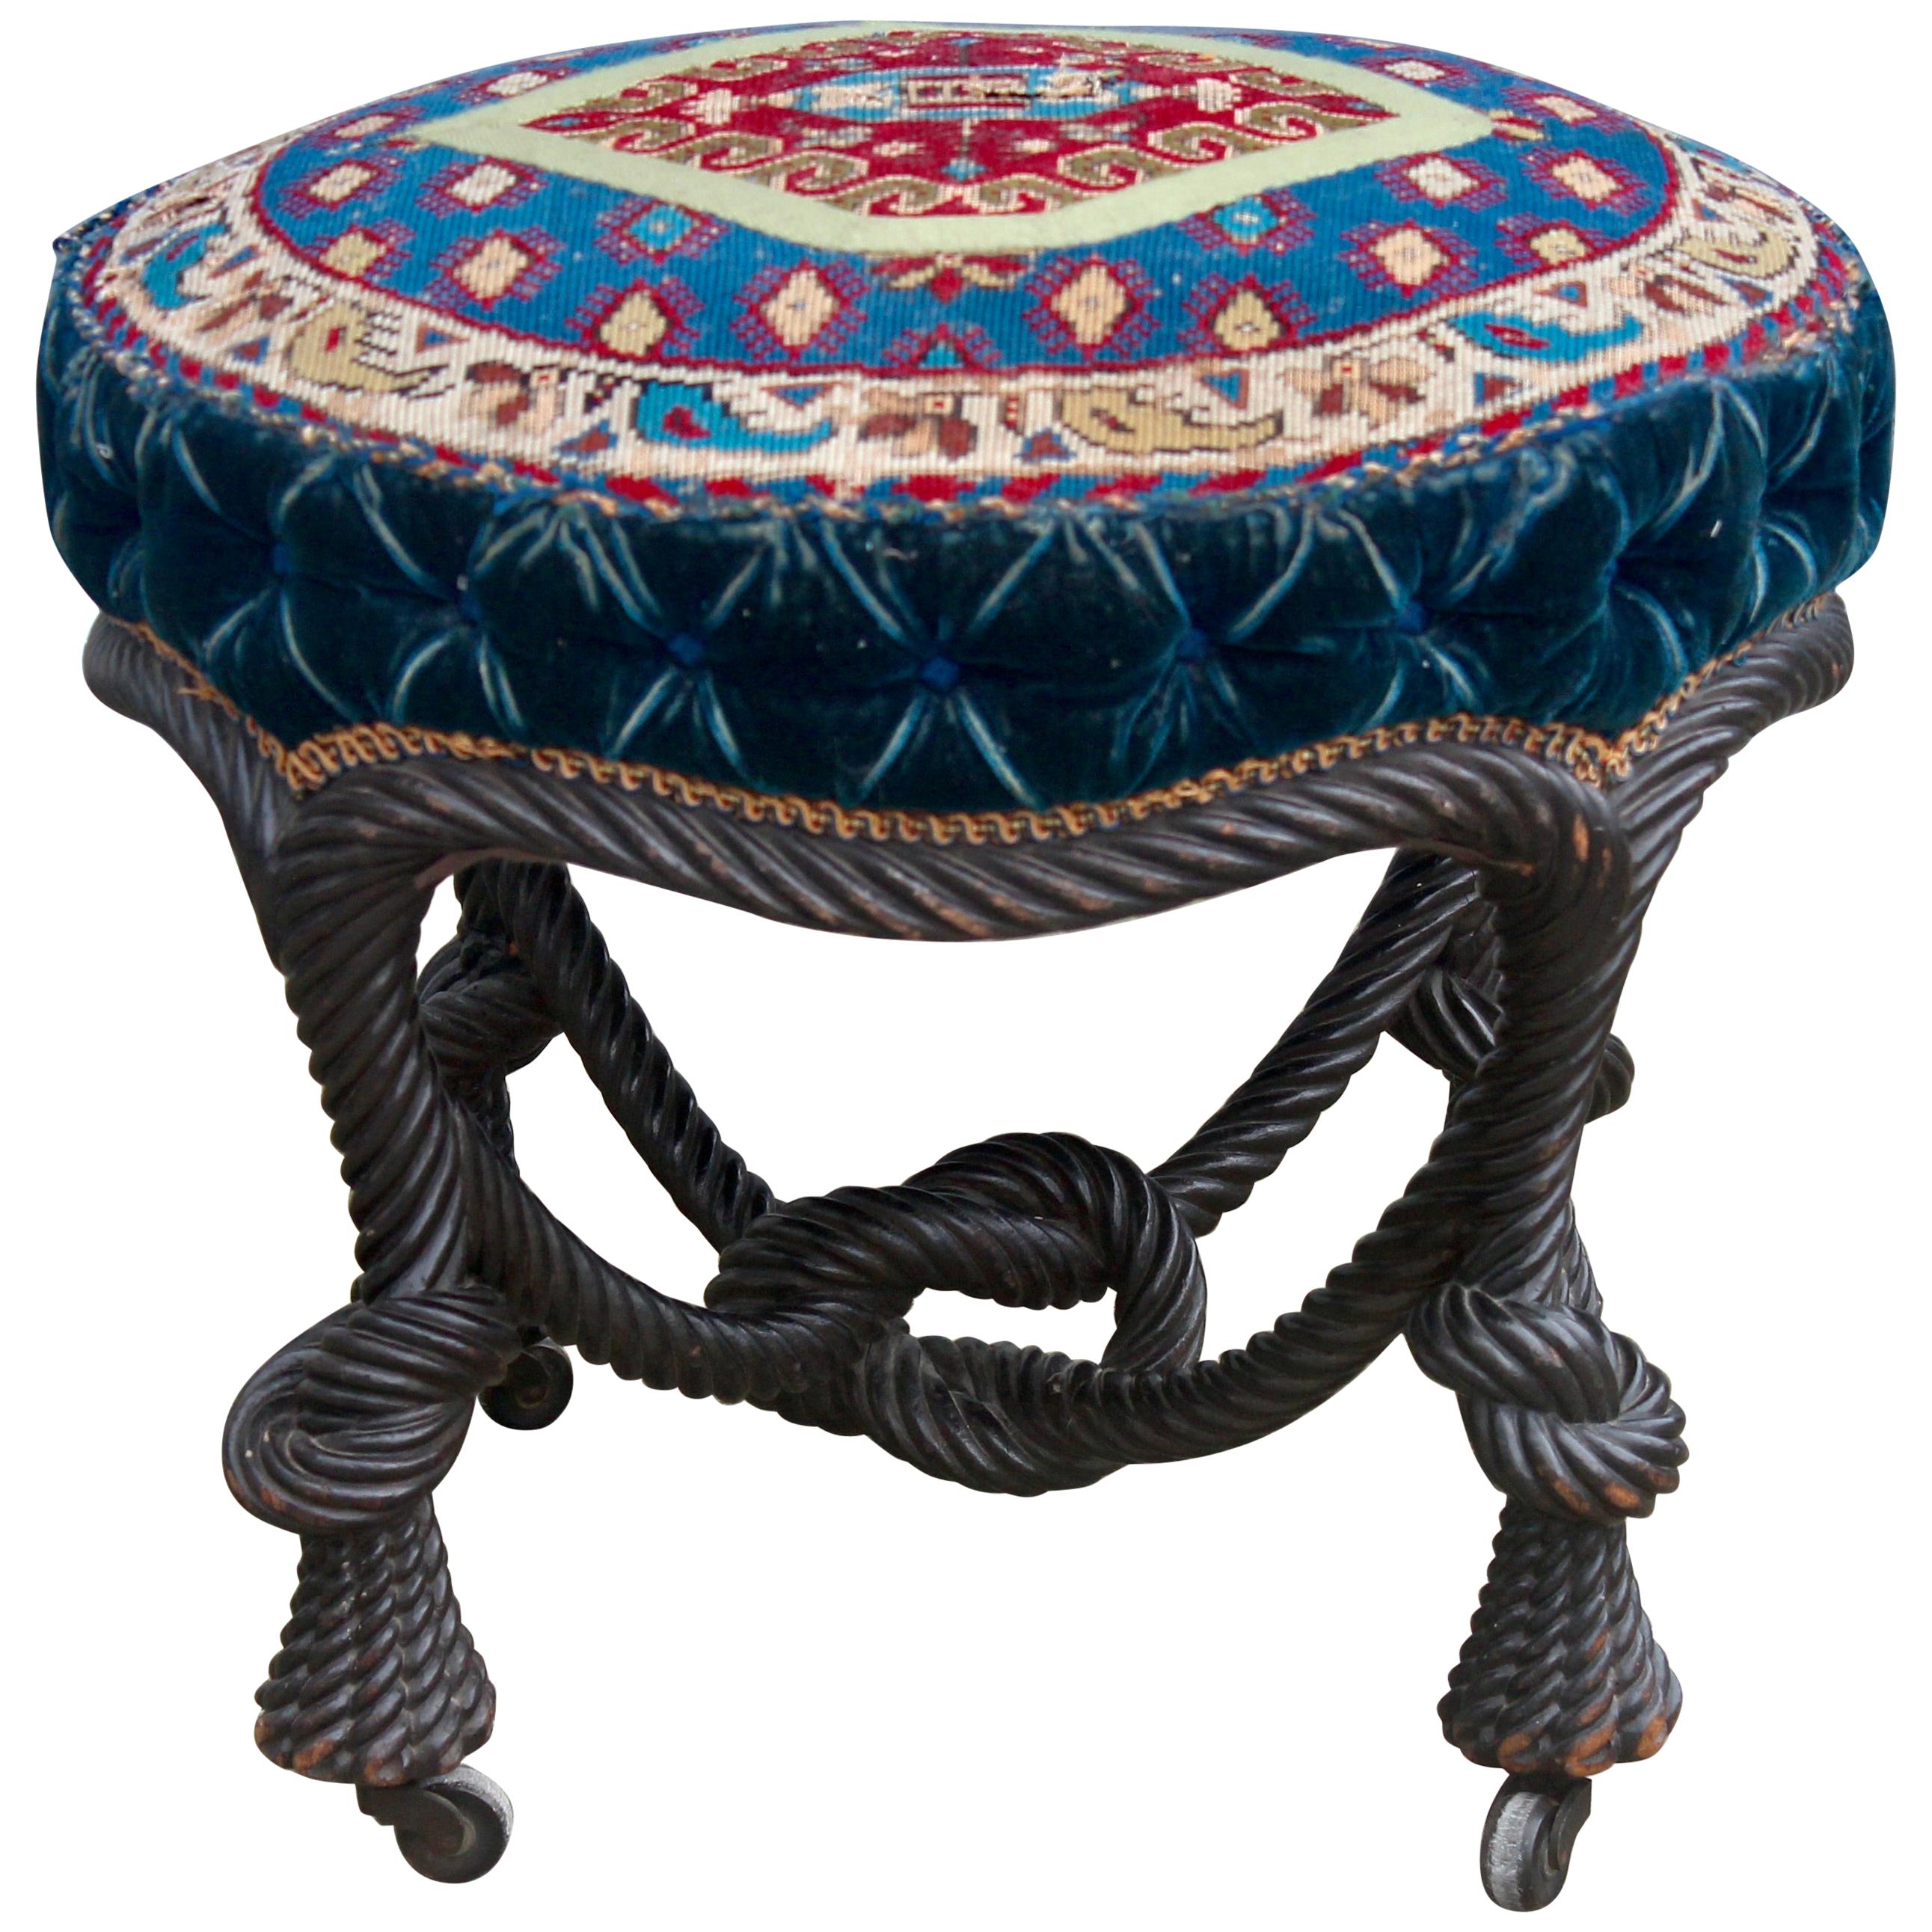 French Napoléon III Carved Rope Stool Attributed to A.M.E Fournier, circa 1875